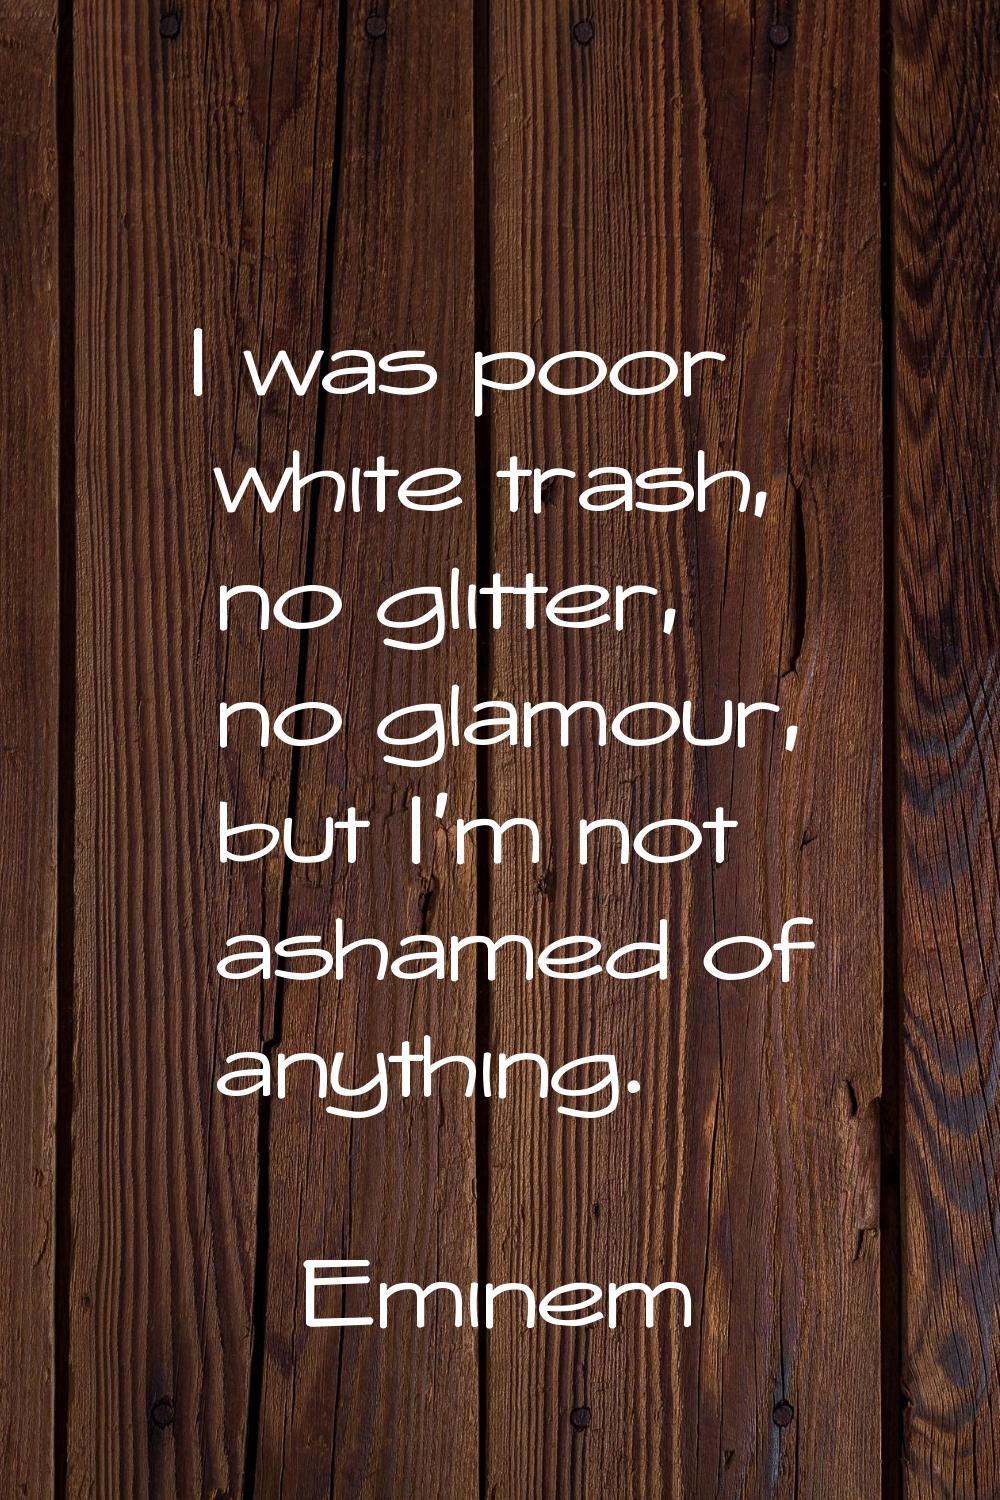 I was poor white trash, no glitter, no glamour, but I'm not ashamed of anything.